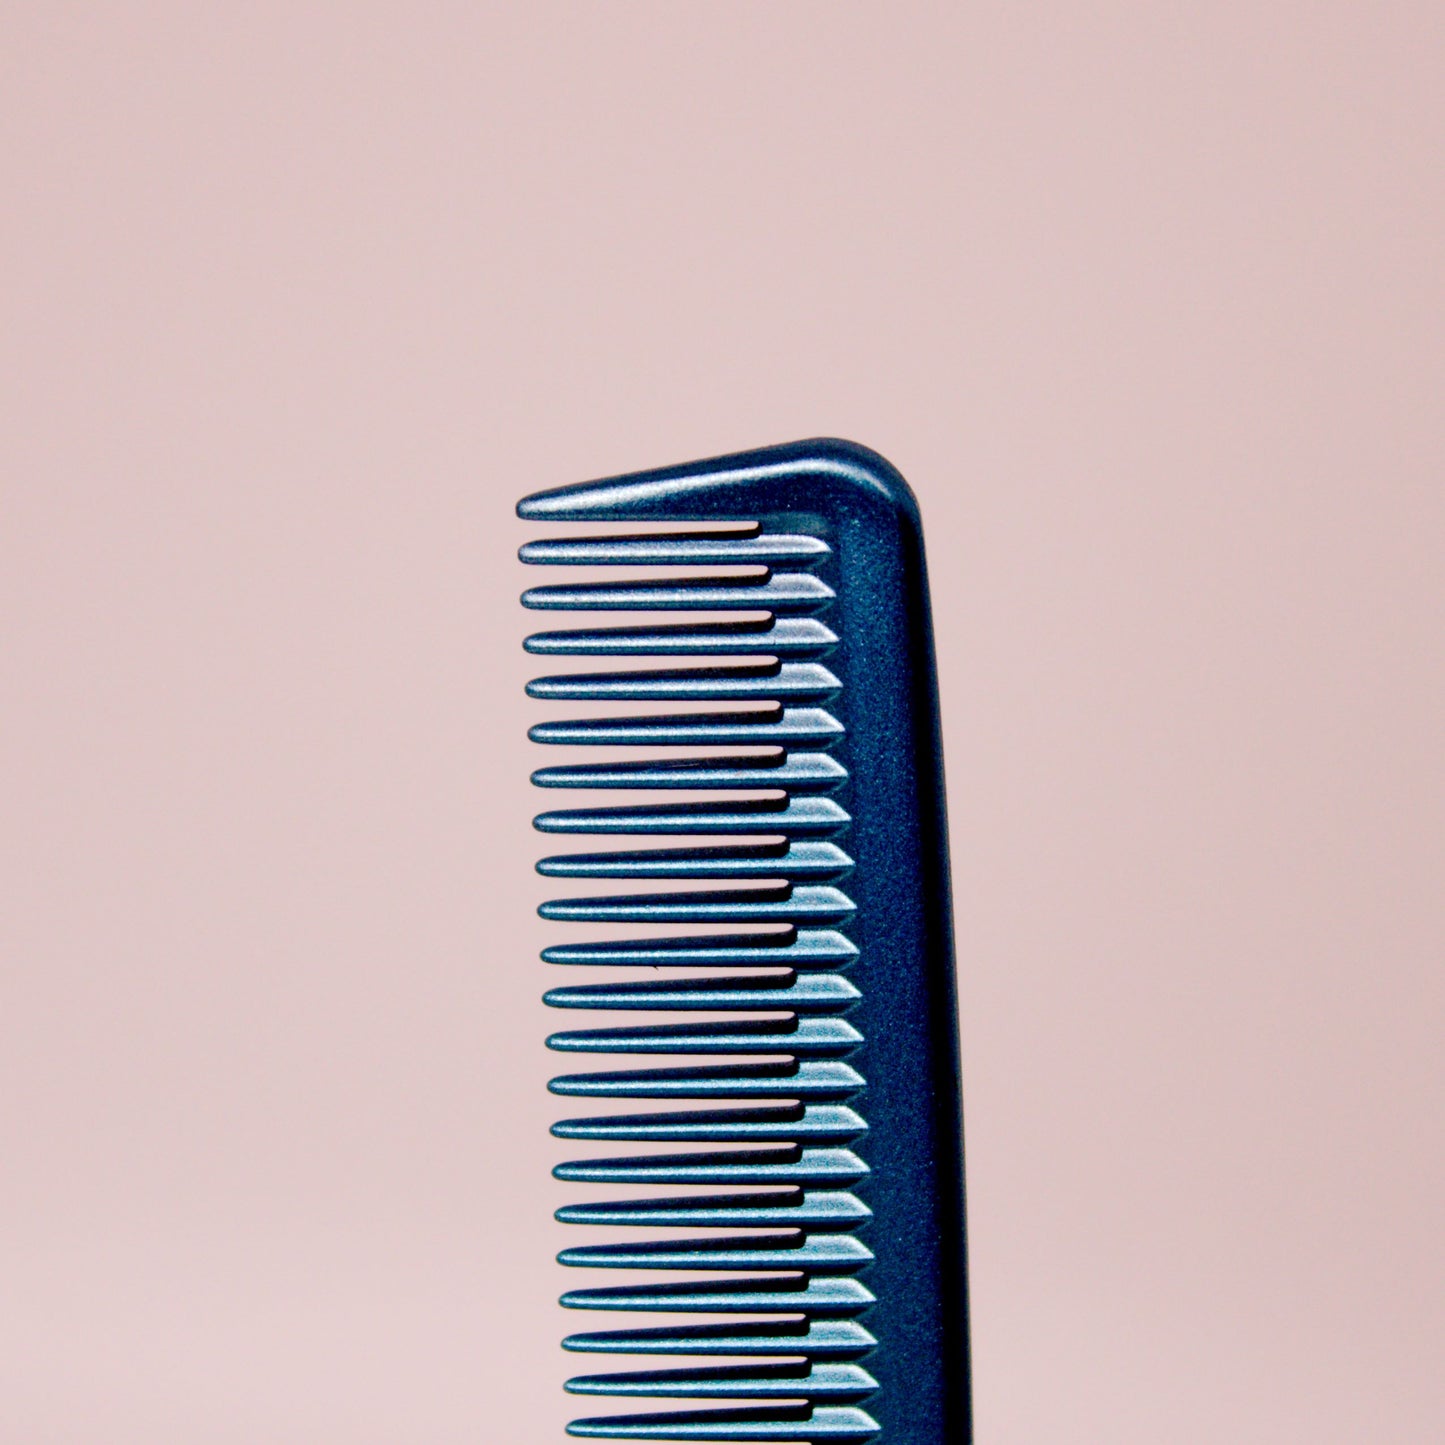 Pegasus MICOLOR 201, 7in Hard Rubber Hair Detangling/Trimmer Comb, Handmade, Seamless, Smooth Edges, Anti Static, Heat and Chemically Resistant, Wet Hair, Everyday Grooming Comb | Peines de goma dura - Blue